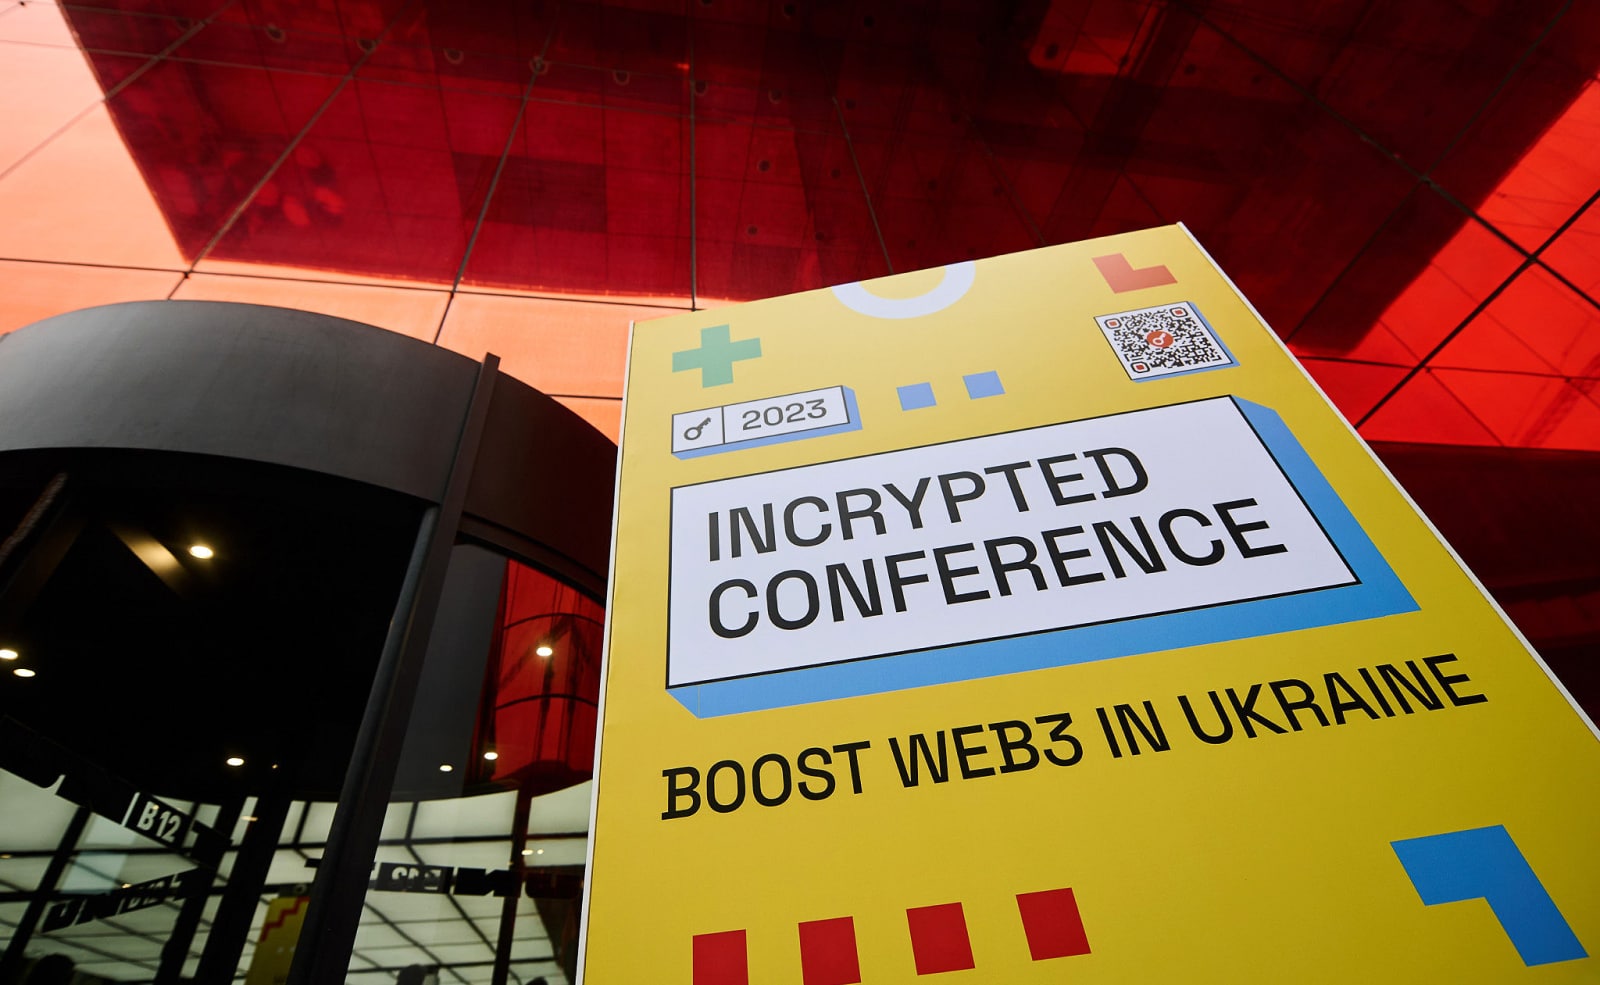 Incrypted Conference 2023 brought together more than 1000 crypto enthusiasts in Kyiv, including representatives of the government, crypto community, and startups. Заглавный коллаж статьи.